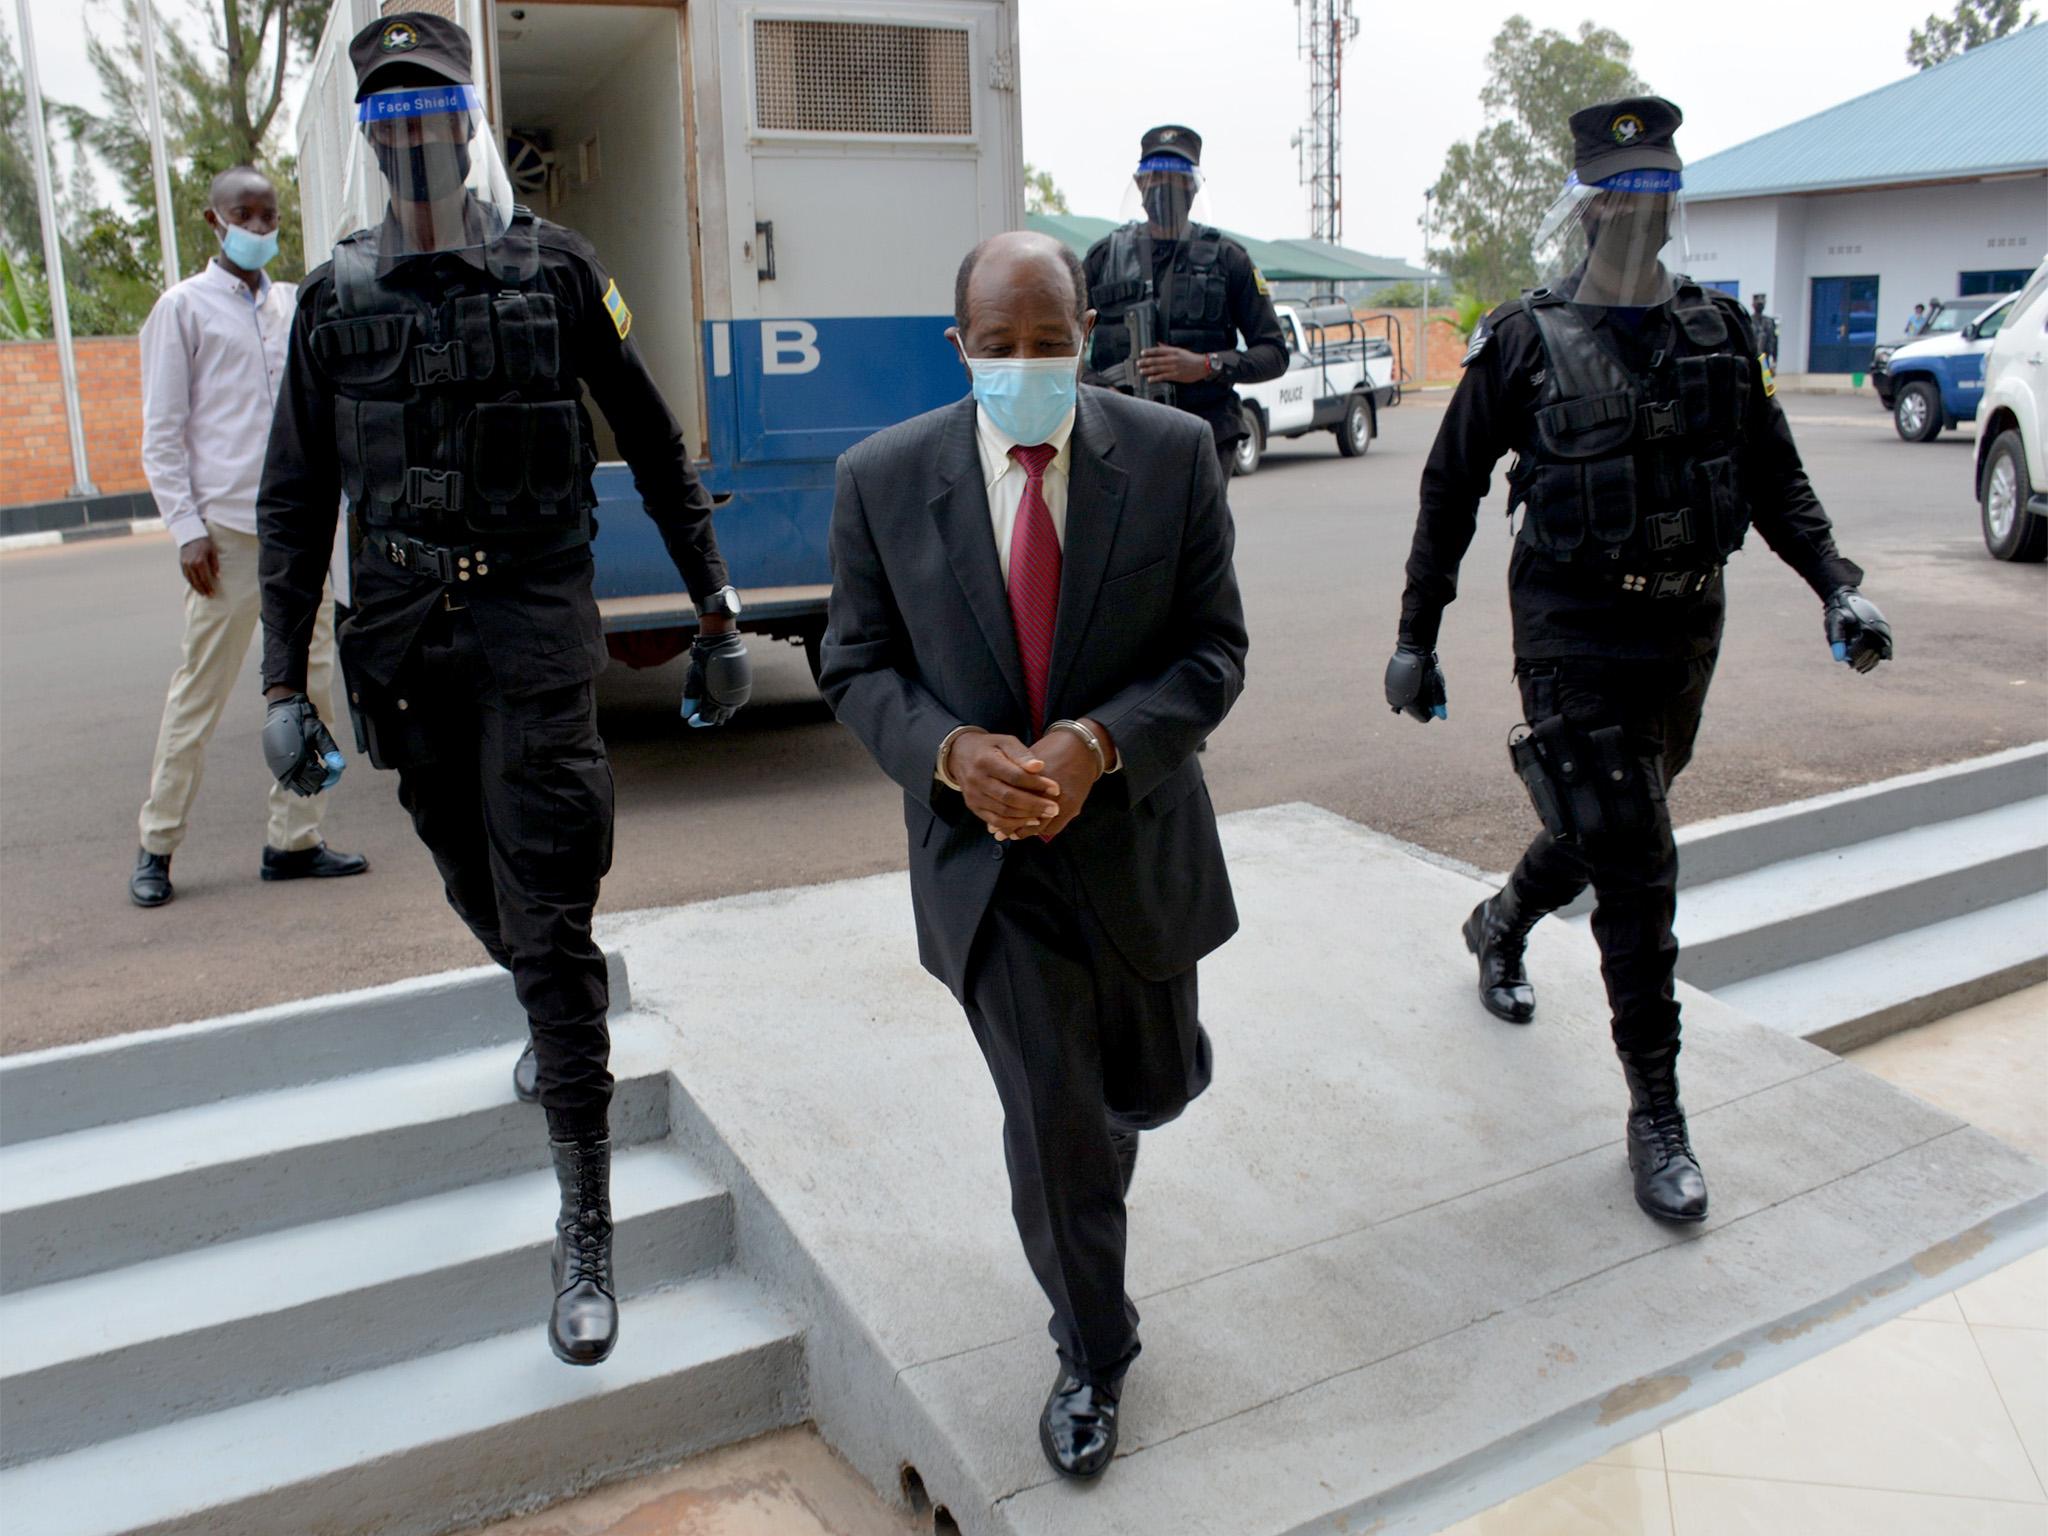 Mr Rusesabagina shortly after his arrest – it was not disclosed where he is being held